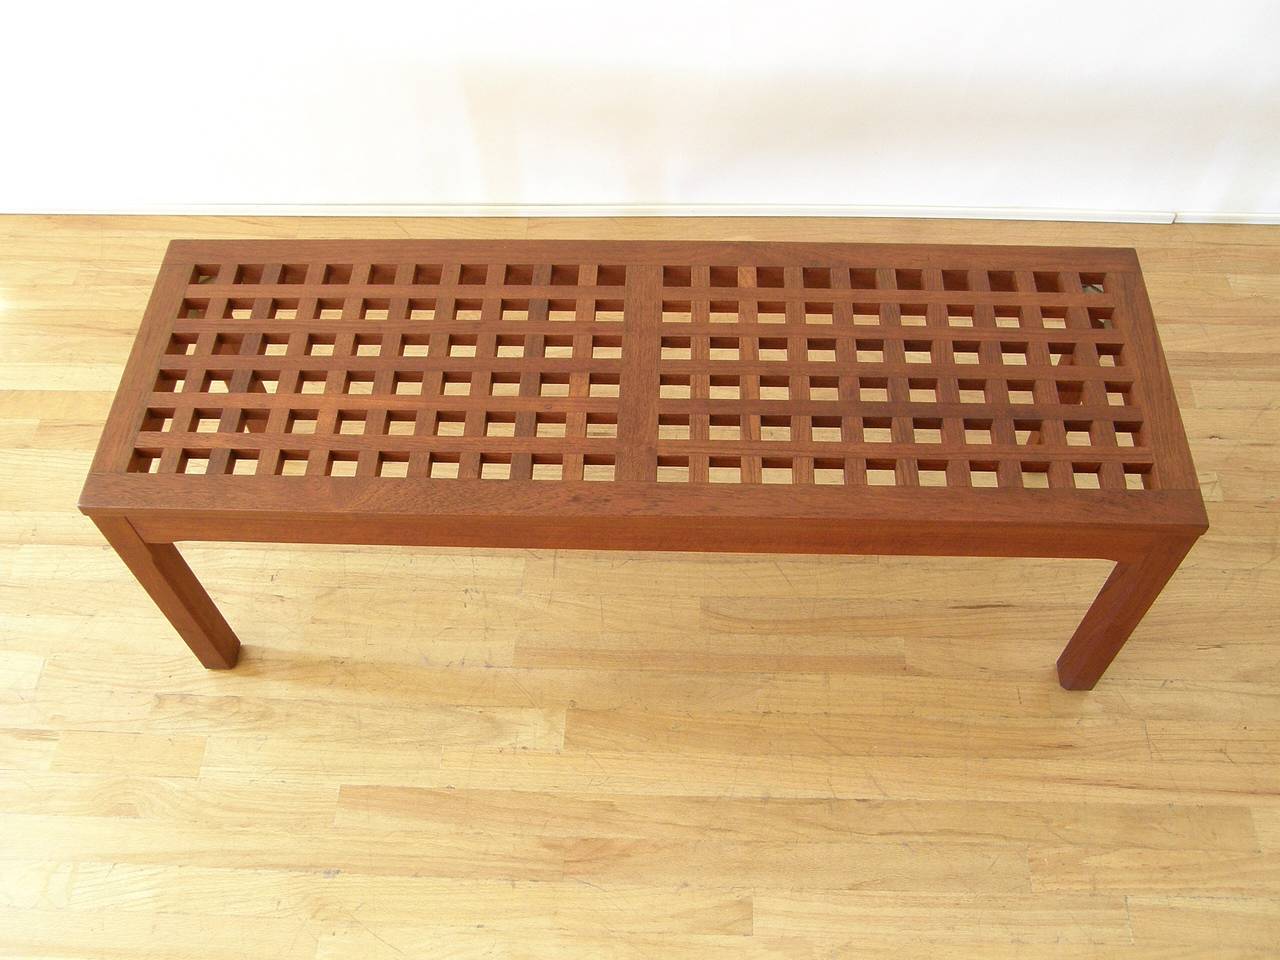 Rectangular teak cocktail or coffee table with a grid form top. This table would also make an excellent low display table or plant stand. The design is reminiscent of the grid form trays designed by Jen Quistgaard for Dansk.

attributed to John